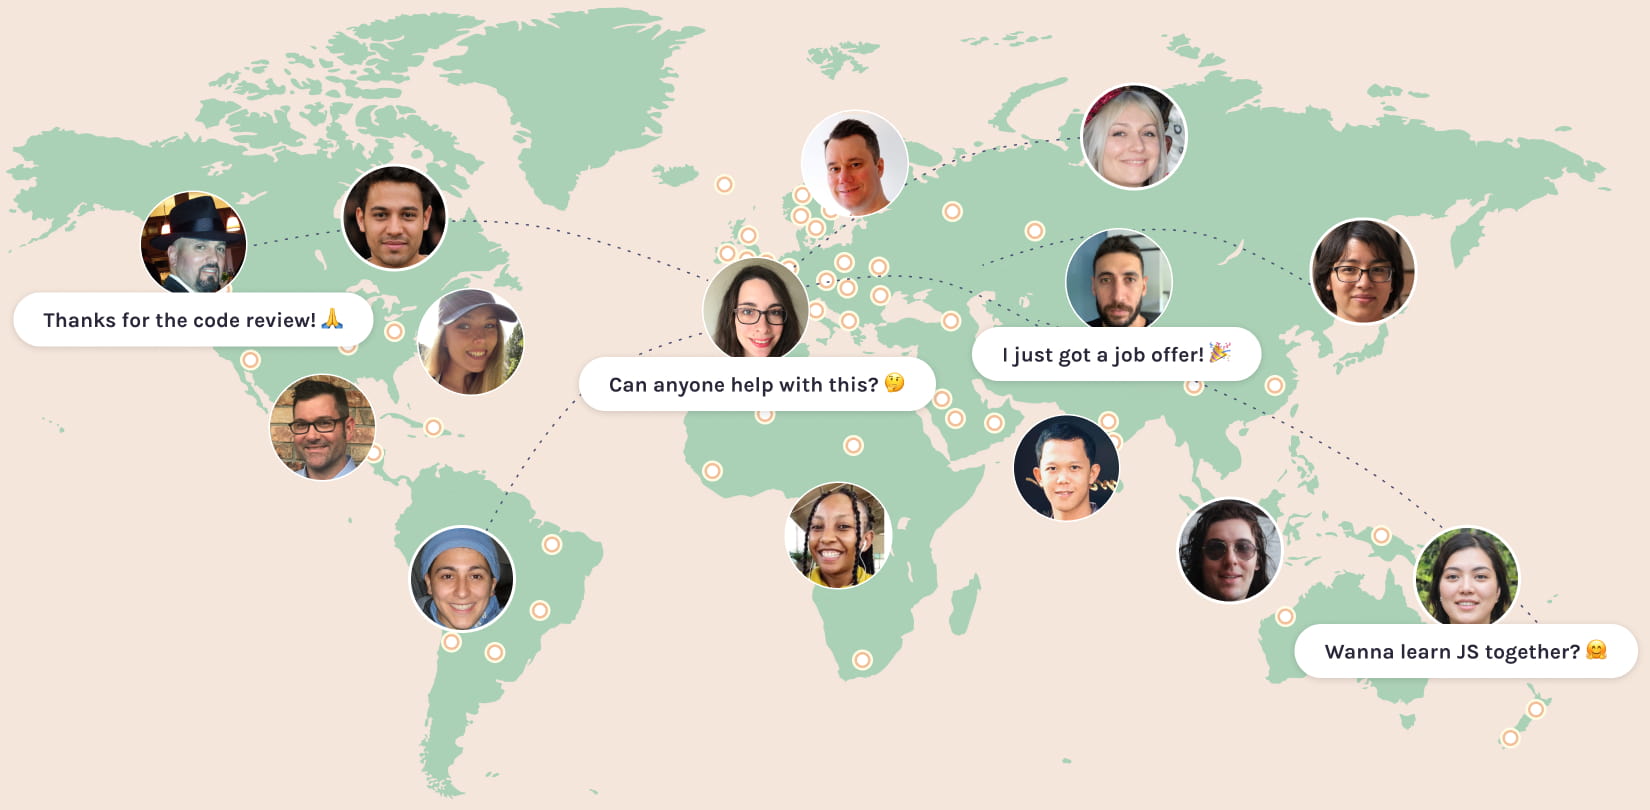 World map with users all over the globe chatting about code.